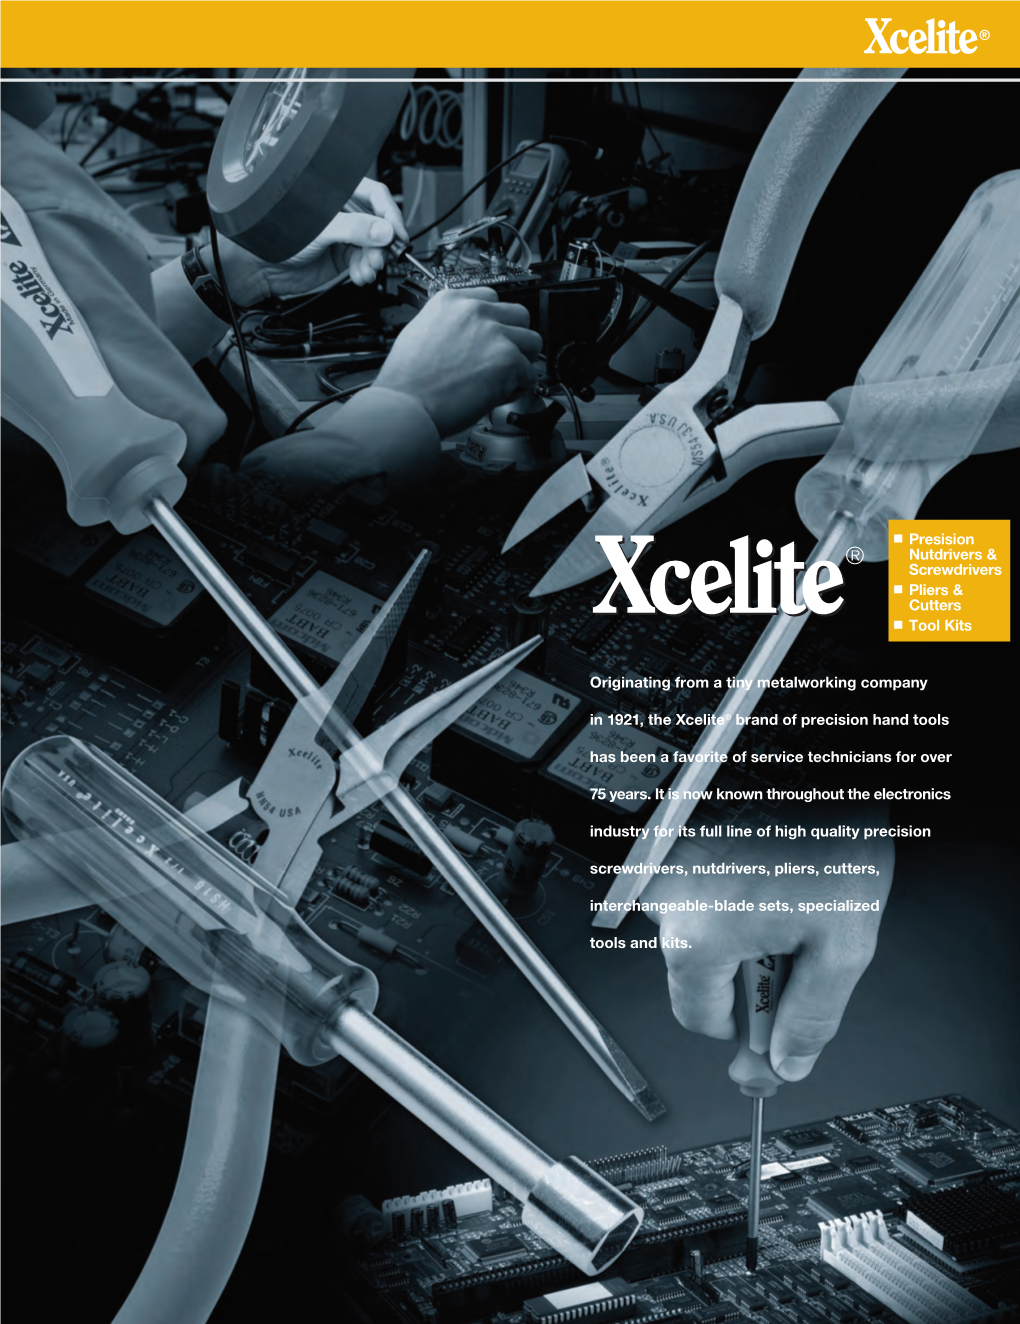 Originating from a Tiny Metalworking Company in 1921, the Xcelite® Brand of Precision Hand Tools Has Been a Favorite of Service Technicians for Over